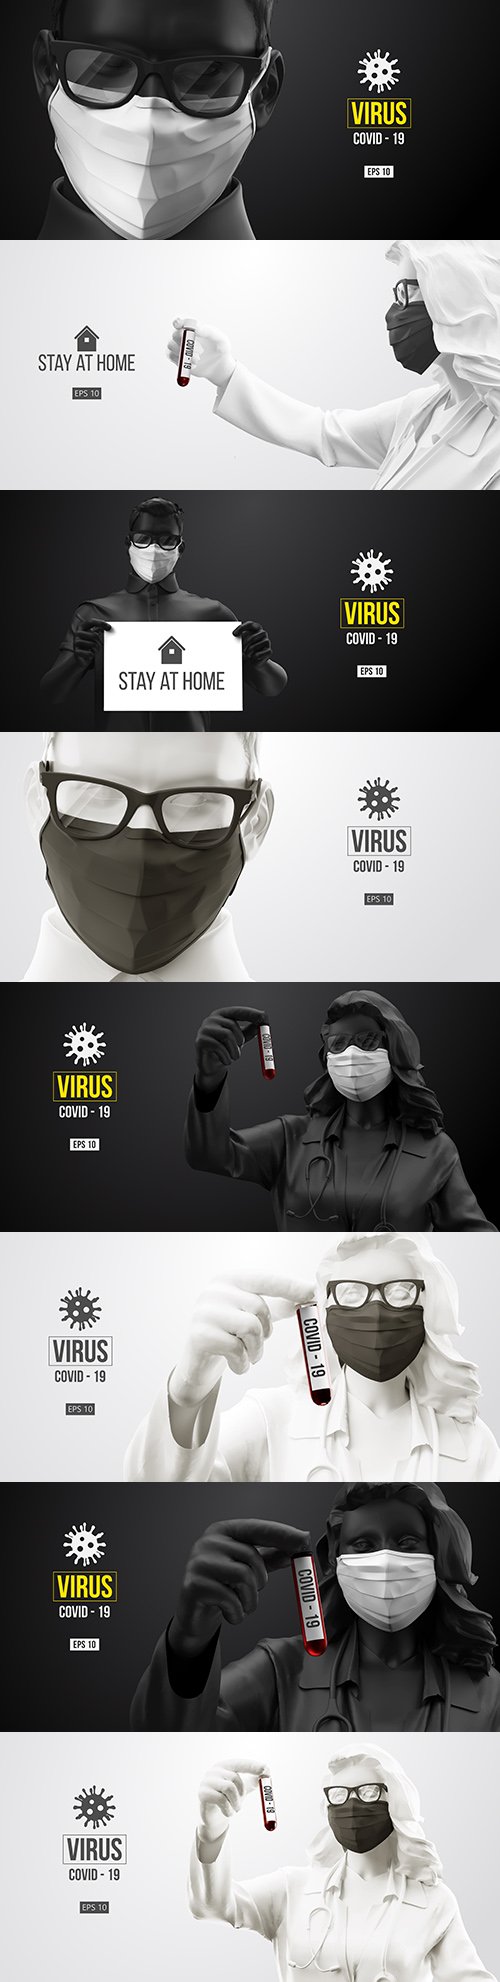 Coronavirus people in medical mask and virus protection